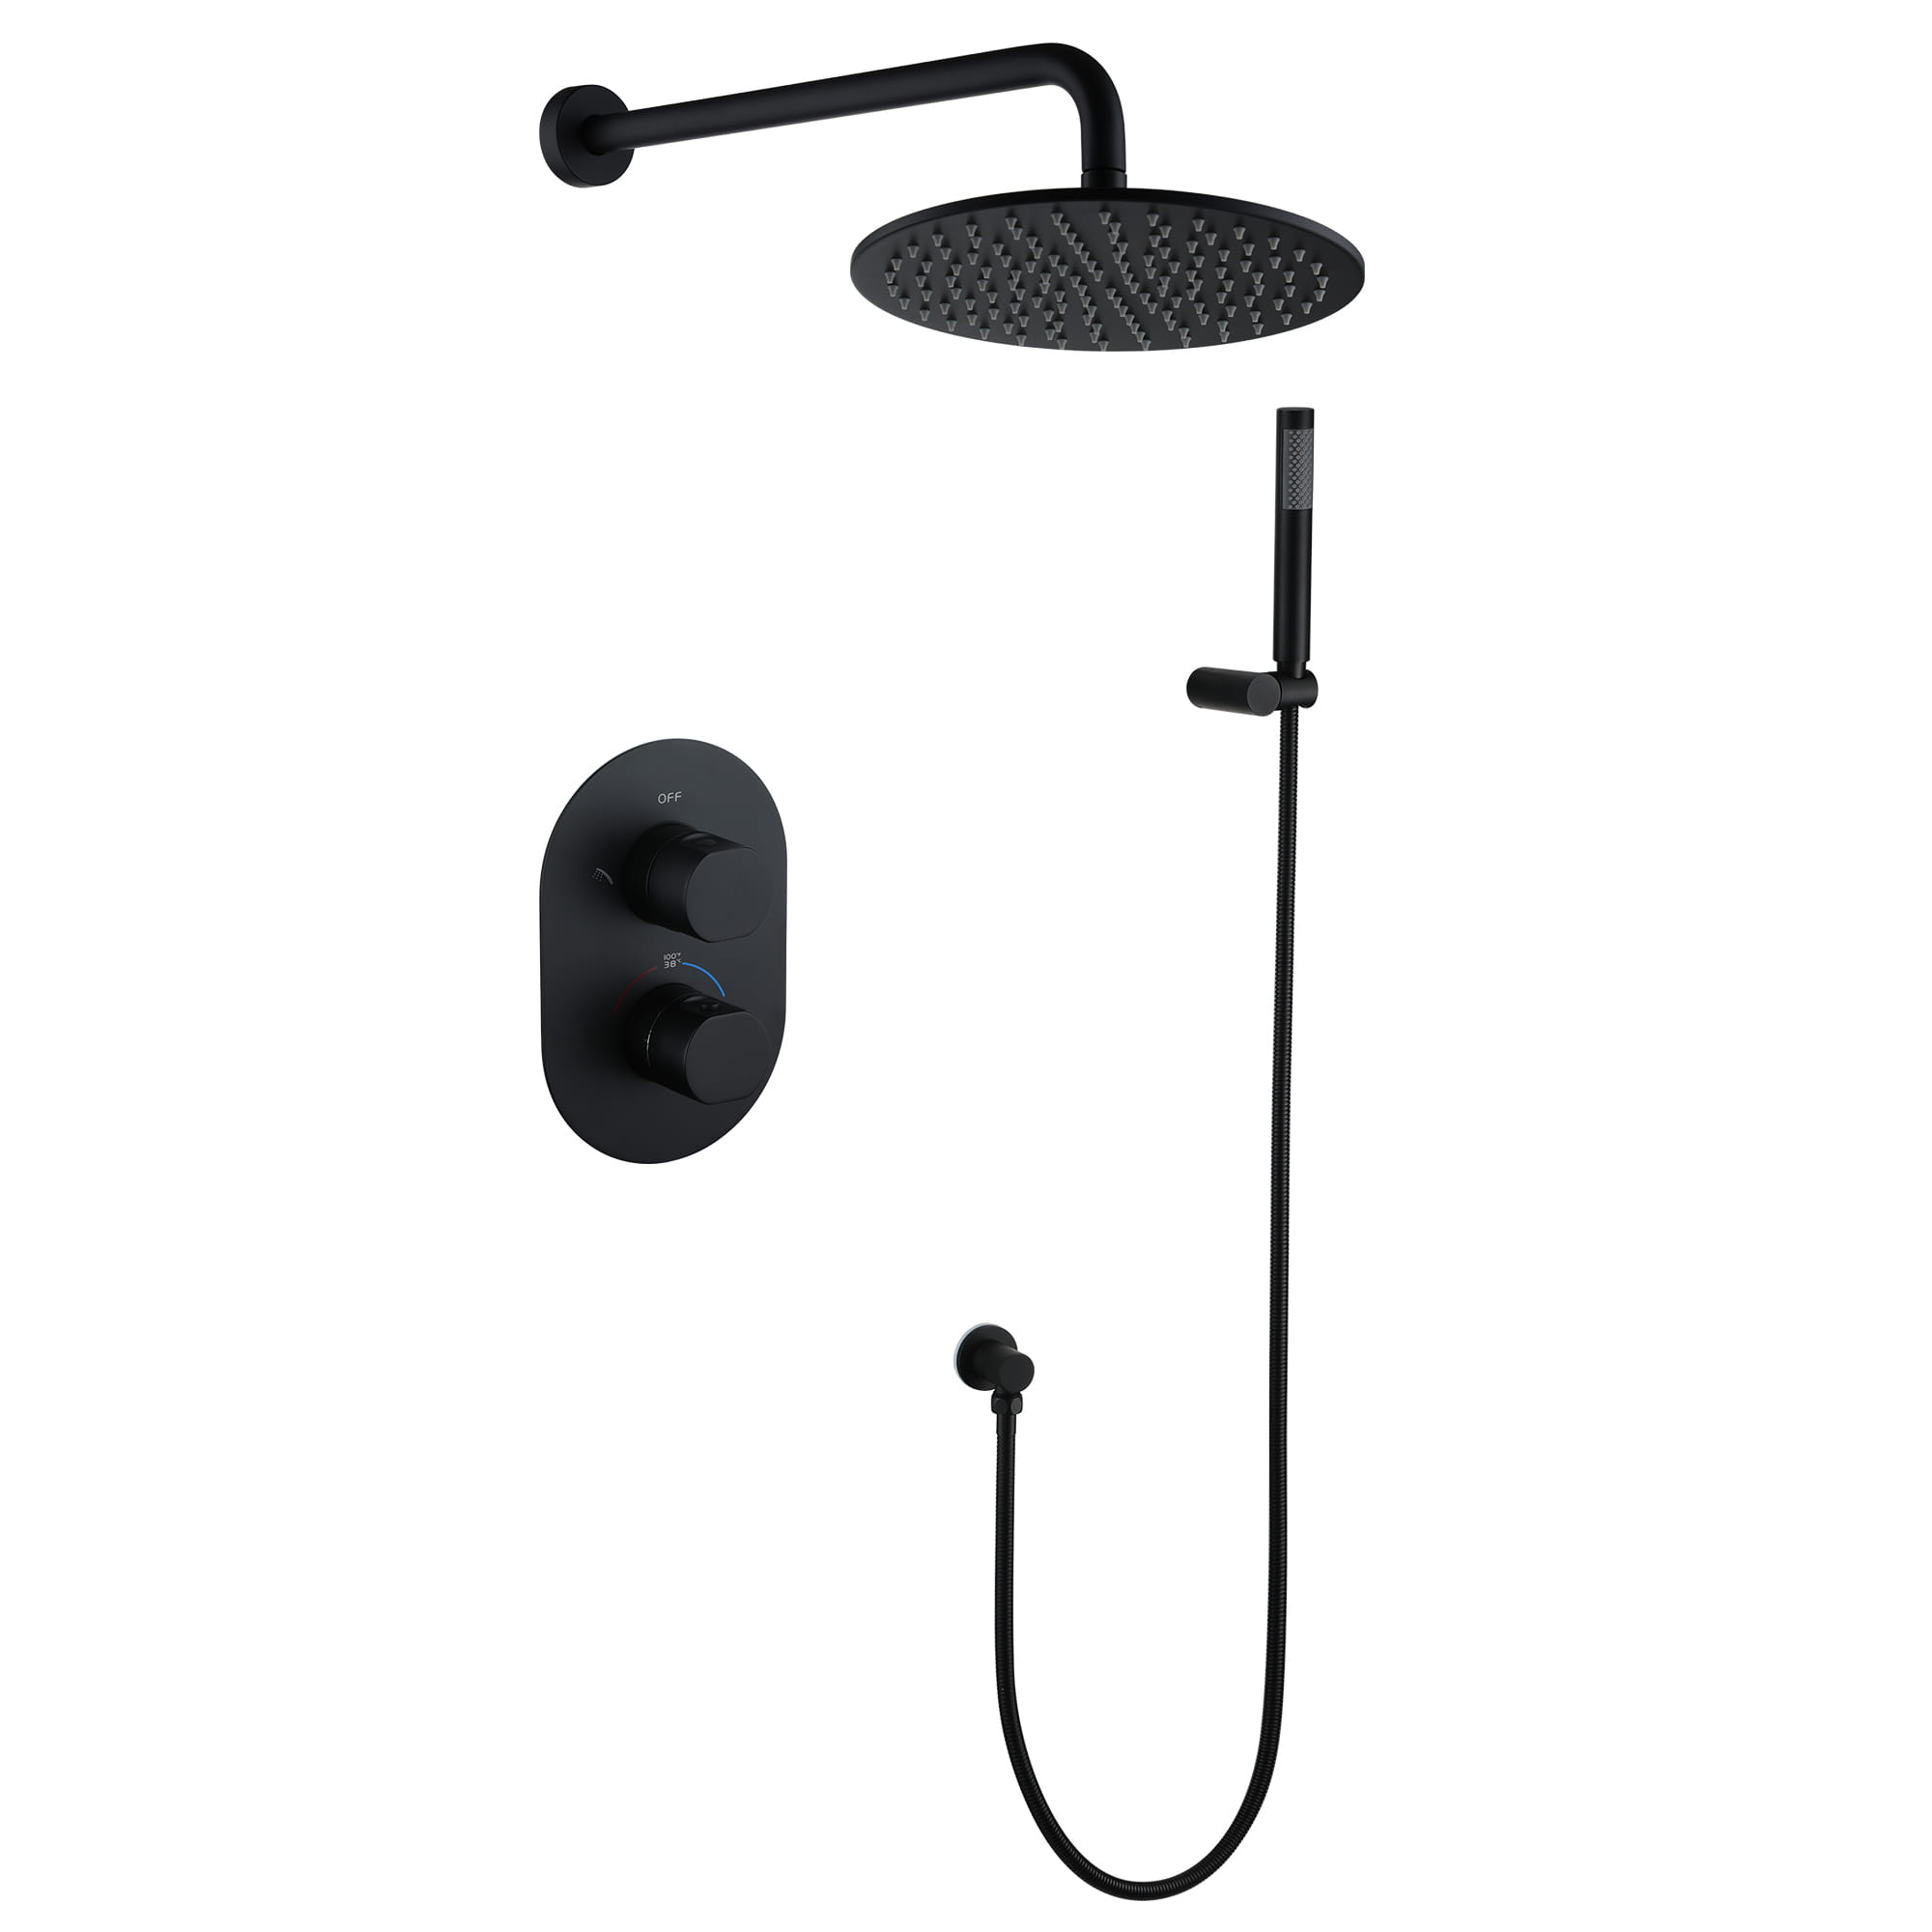 Wall-Mounted Round Bathroom Shower Faucets Set with 1.5GPM Handheld Shower in Matte Black